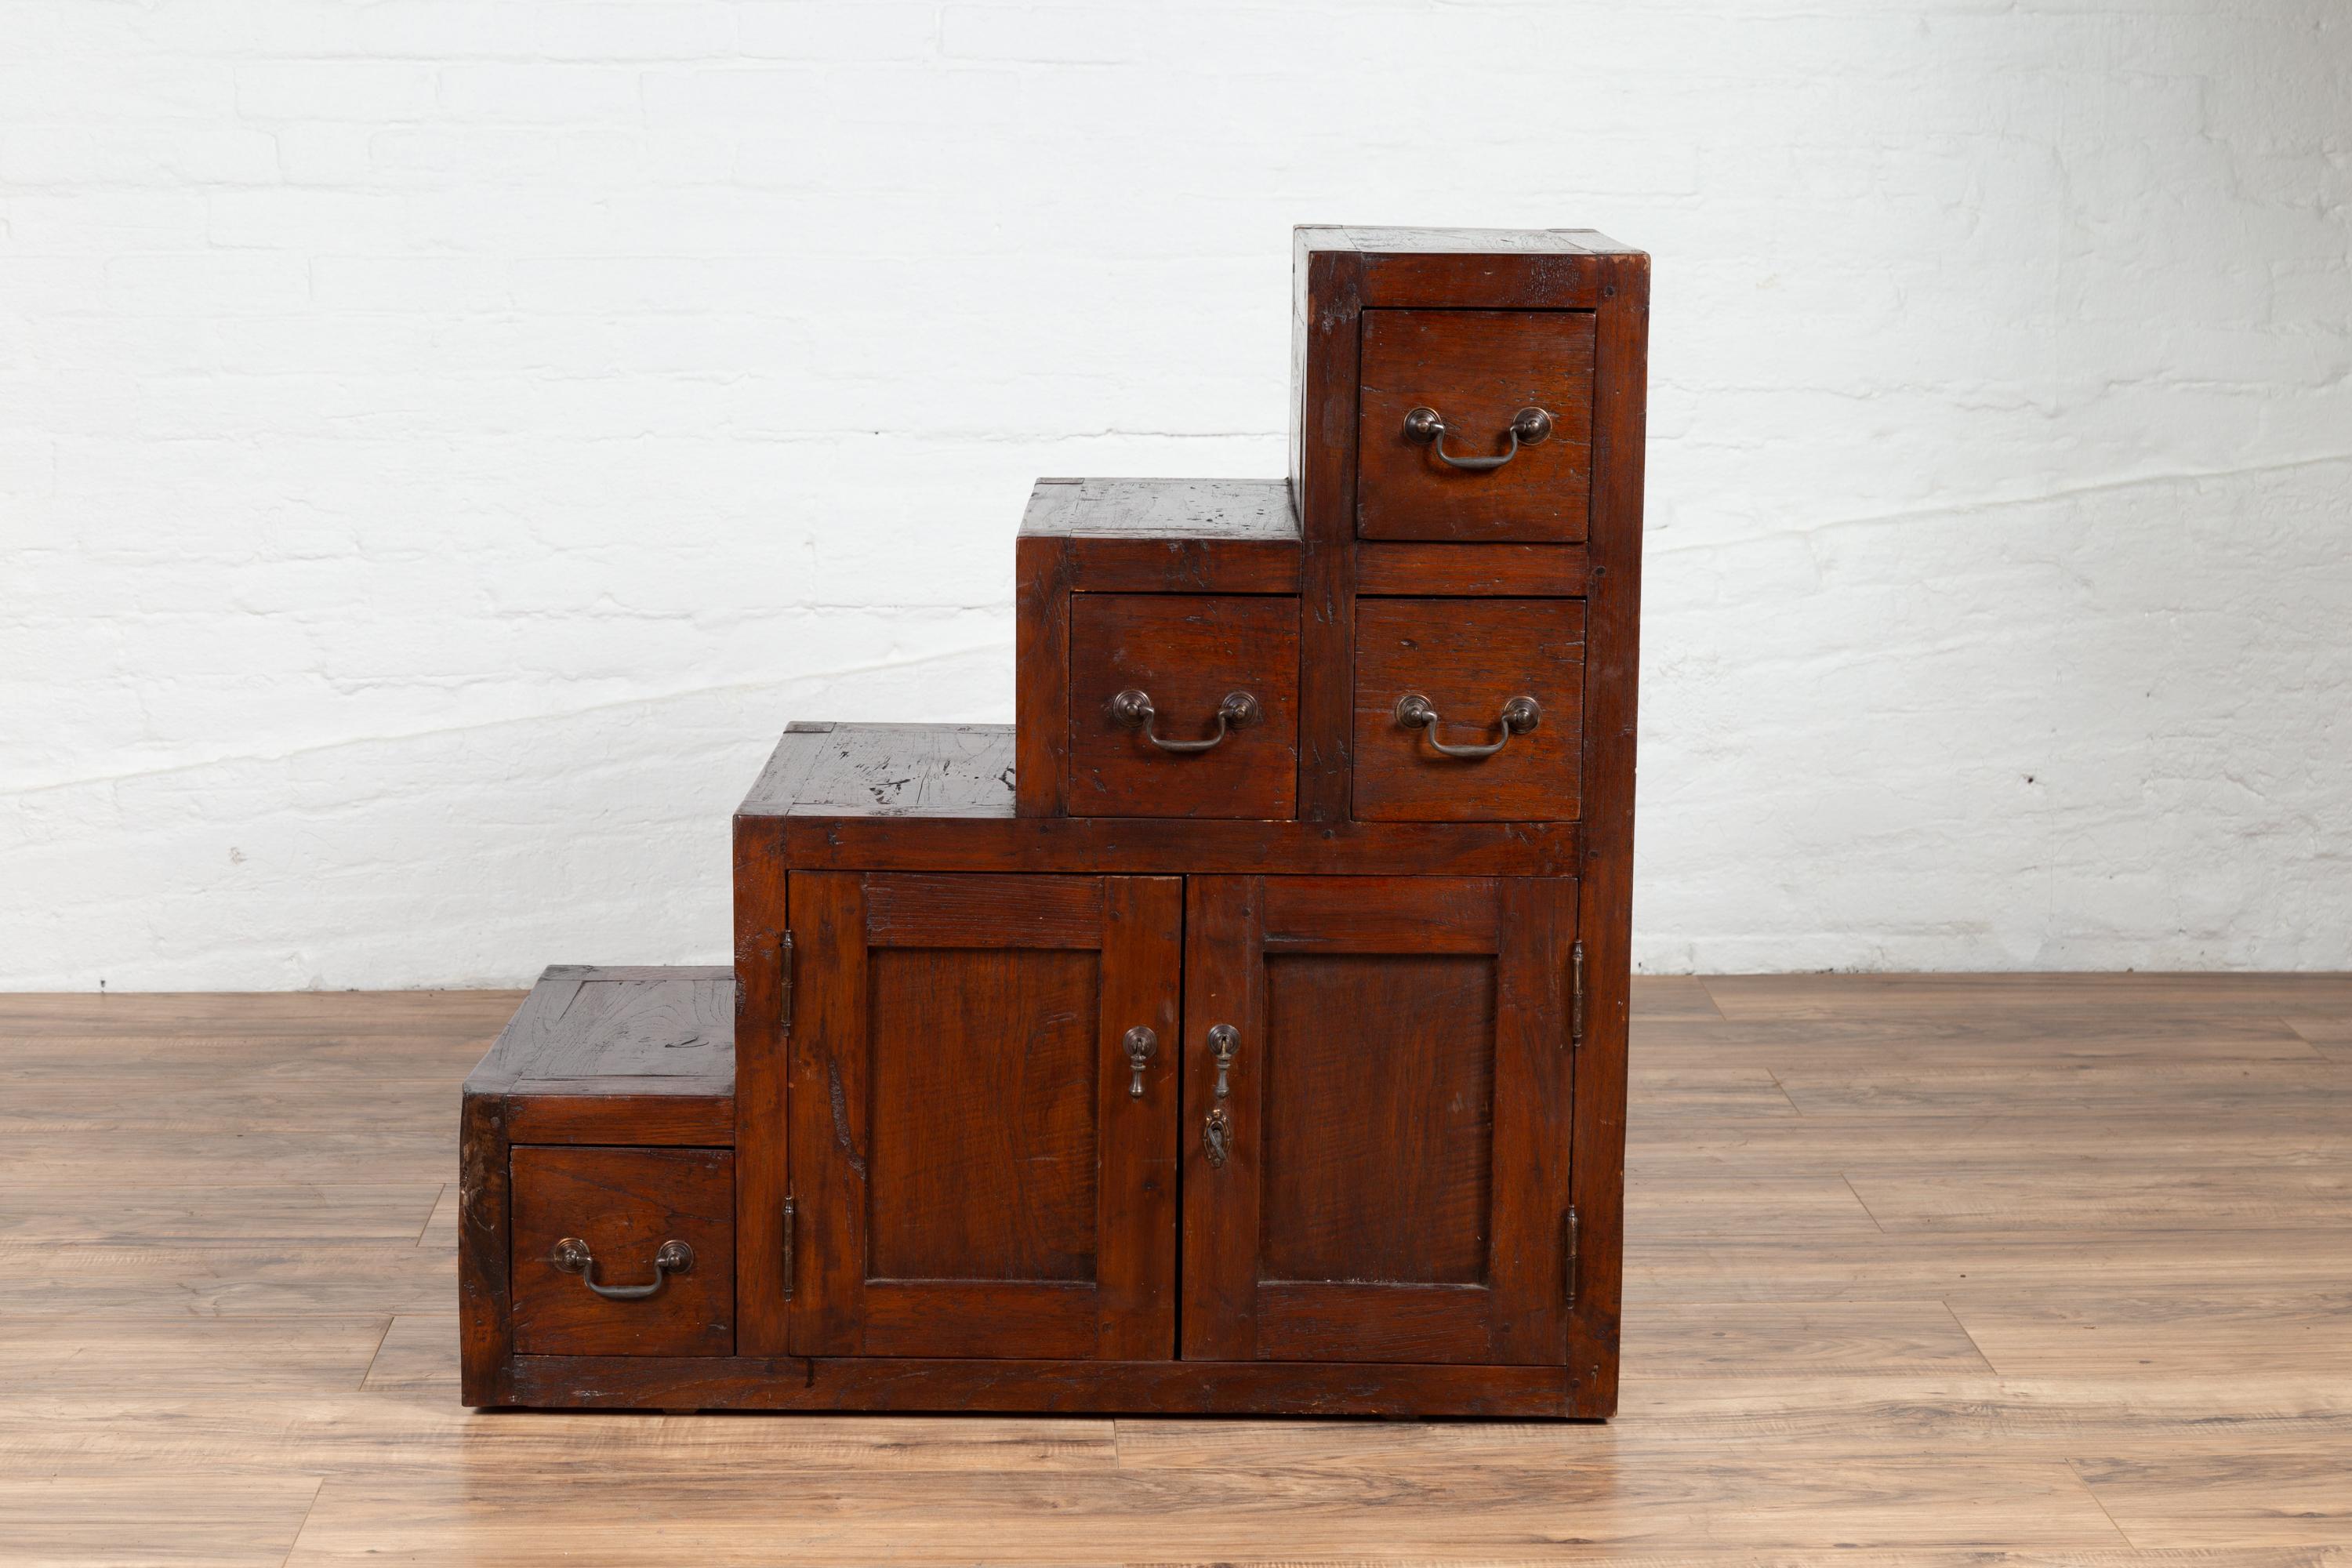 A vintage Javanese staircase tansu in Japanese style from the mid 20th century, with four drawers and double-door cabinet. Inspired by a 19th century Japanese design, this staircase tansu features a convenient stepped storage unit presenting a warm